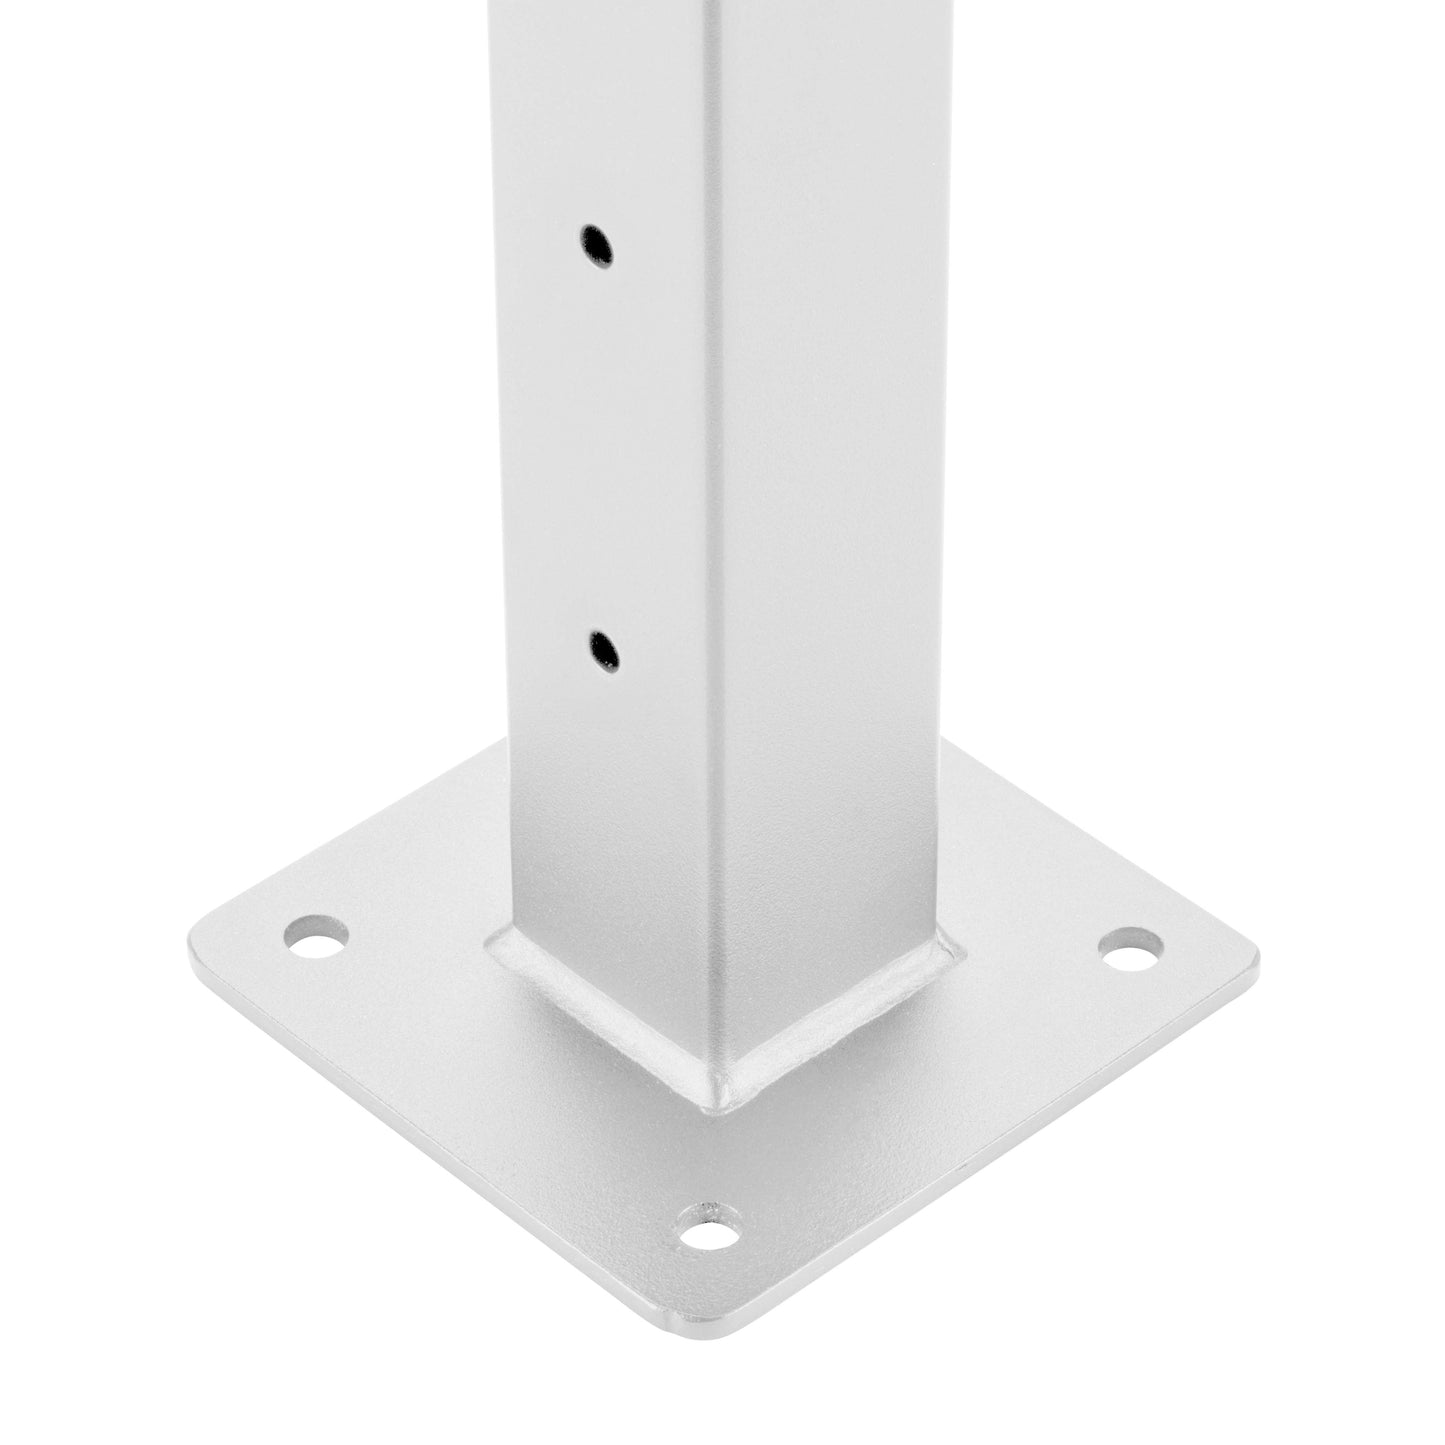 8 ft. Deck Cable Railing, 42 in. Base Mount, White